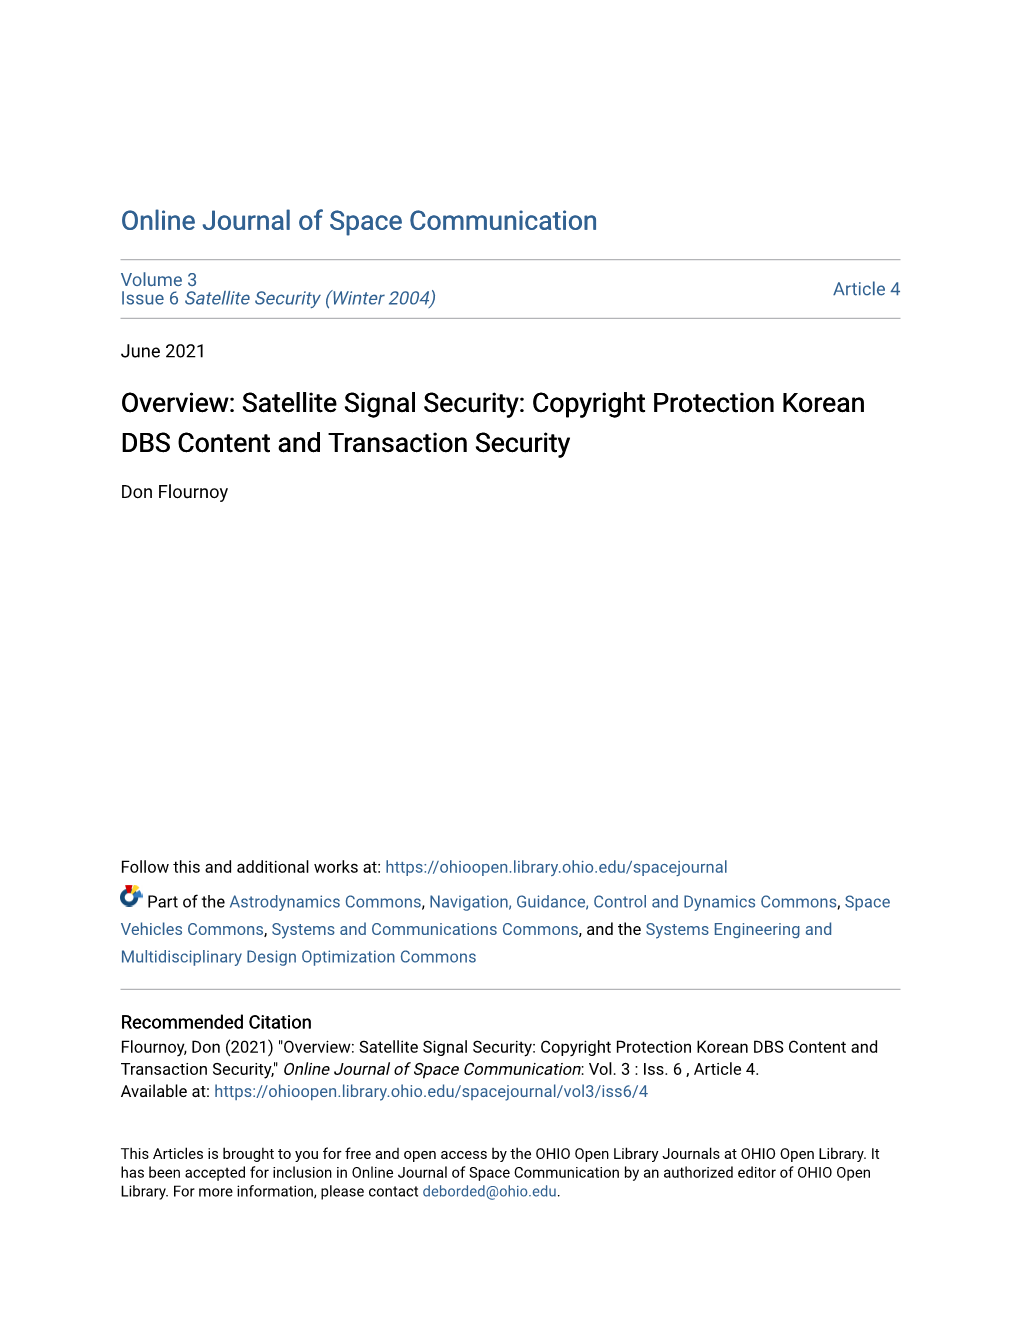 Satellite Signal Security: Copyright Protection Korean DBS Content and Transaction Security